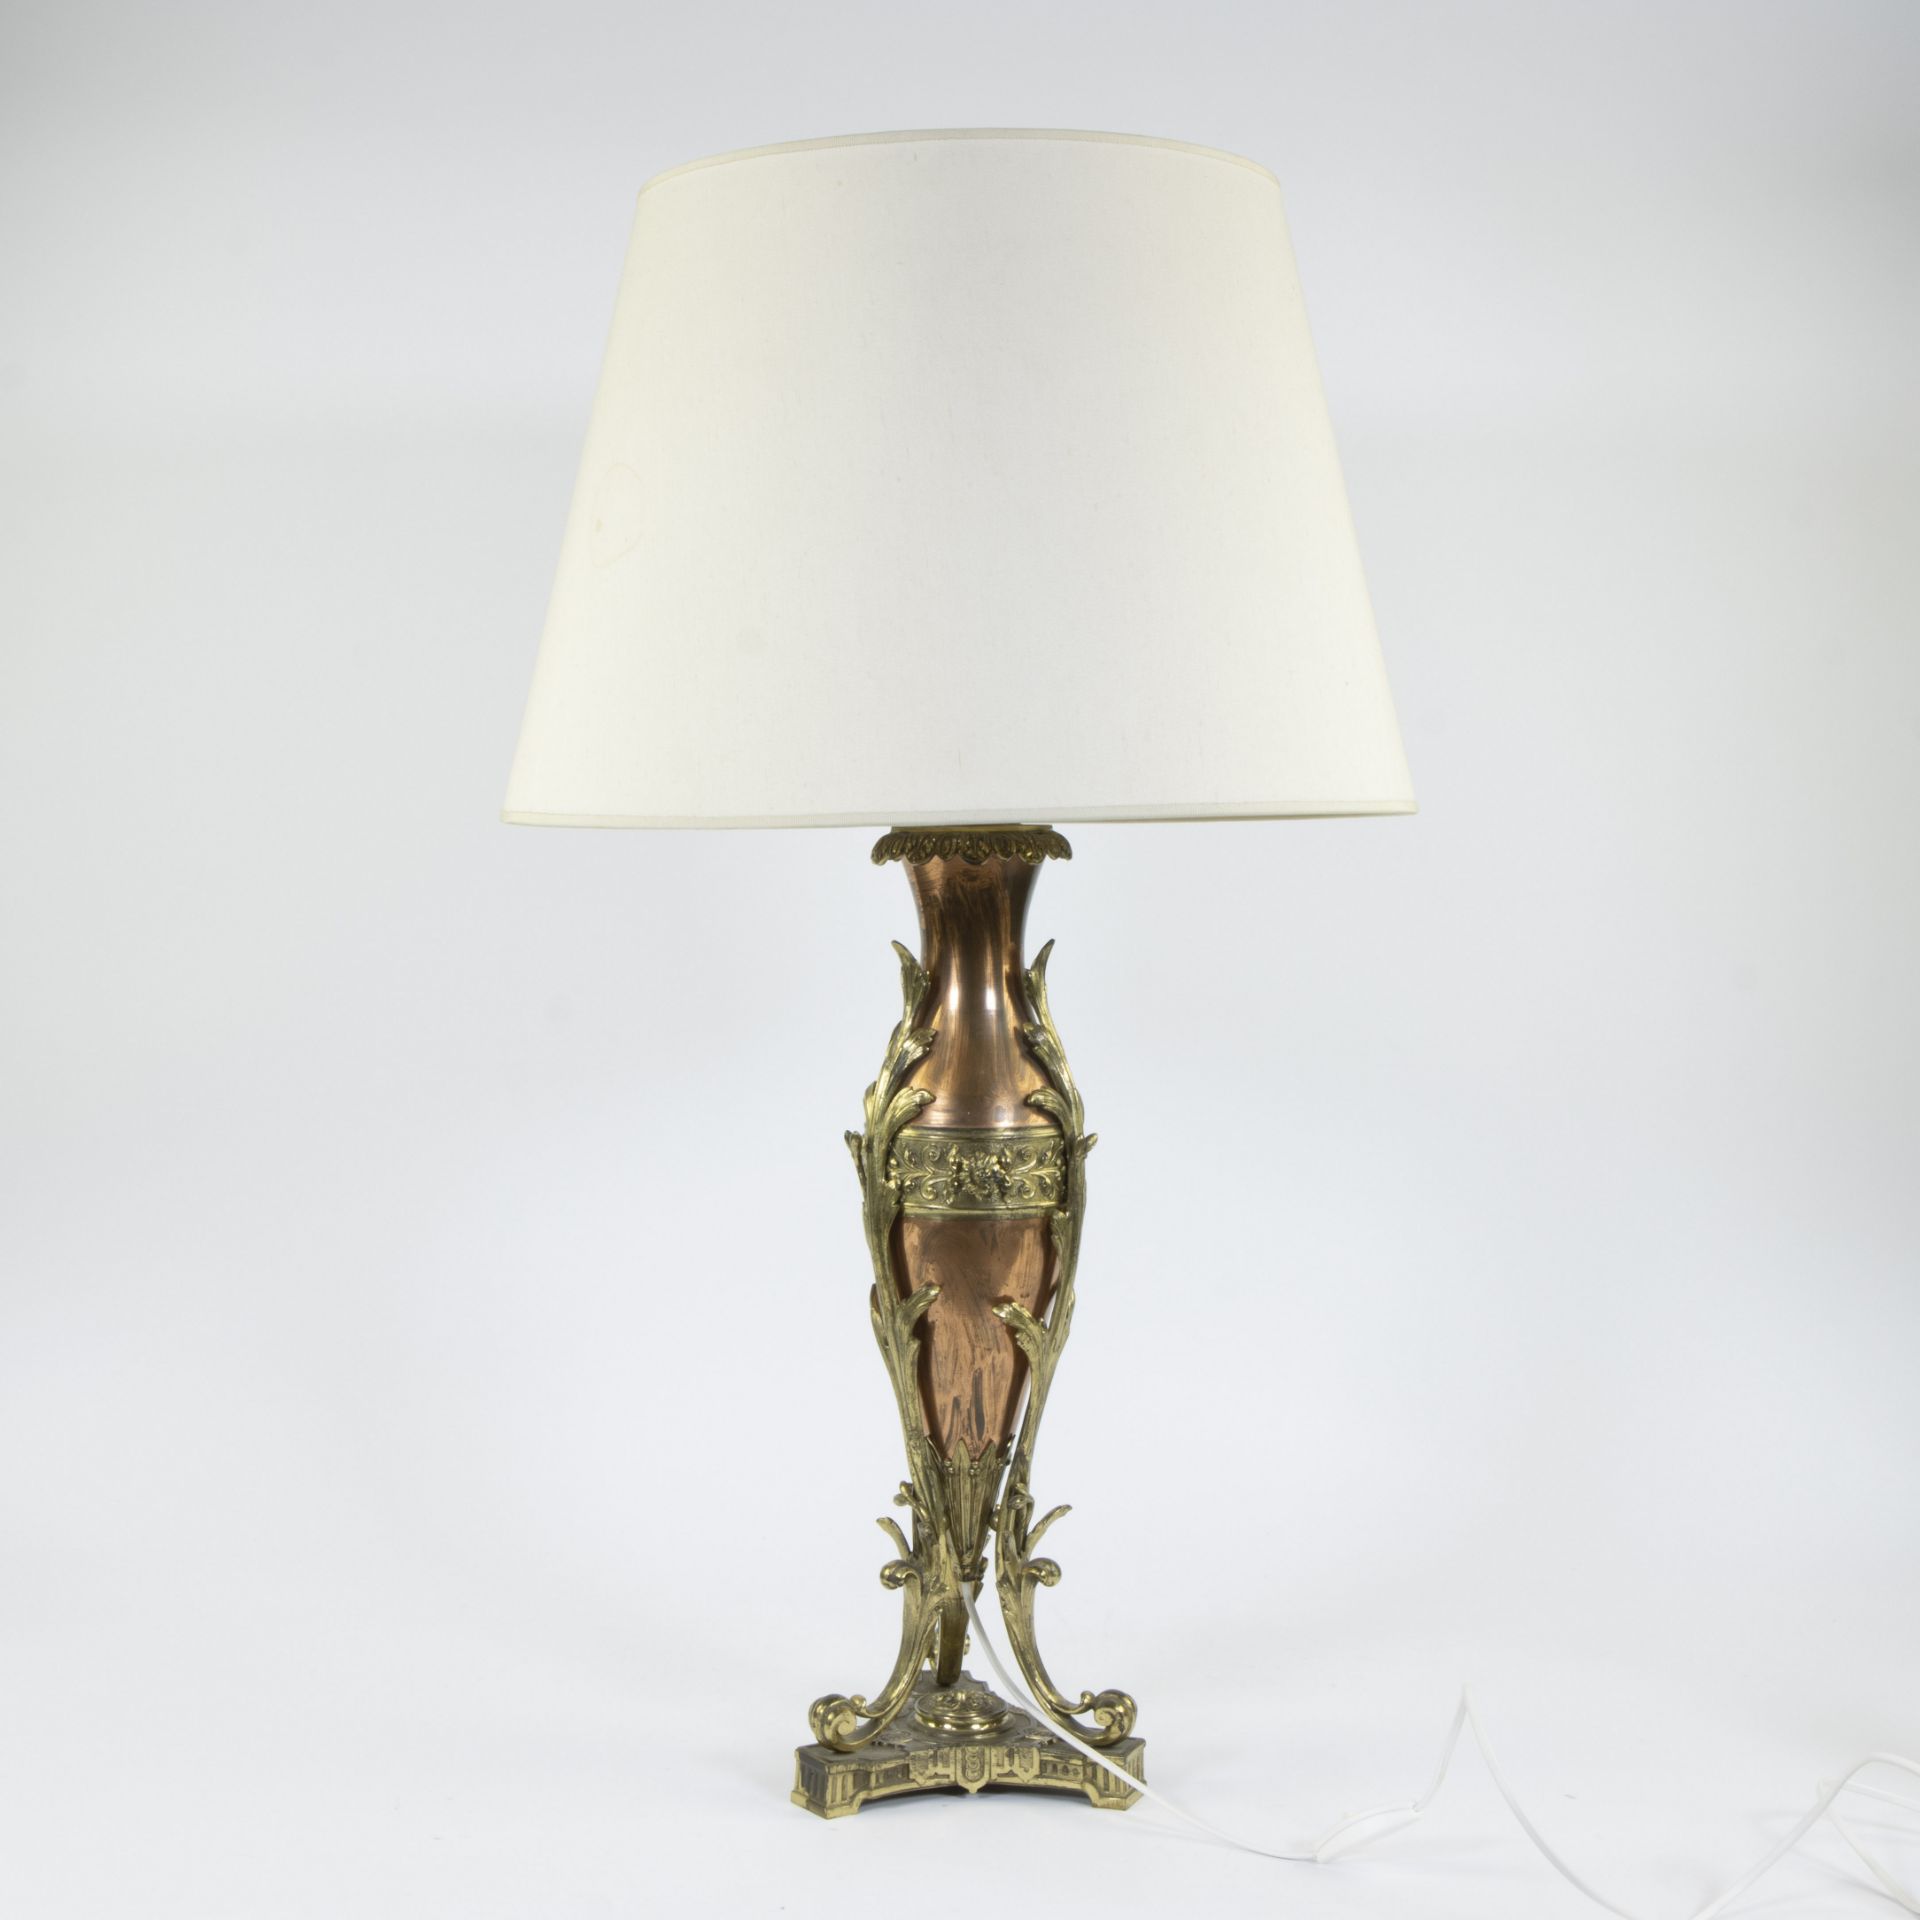 Lampadaire with base in copper and gilt brass, early 20th century - Image 3 of 4